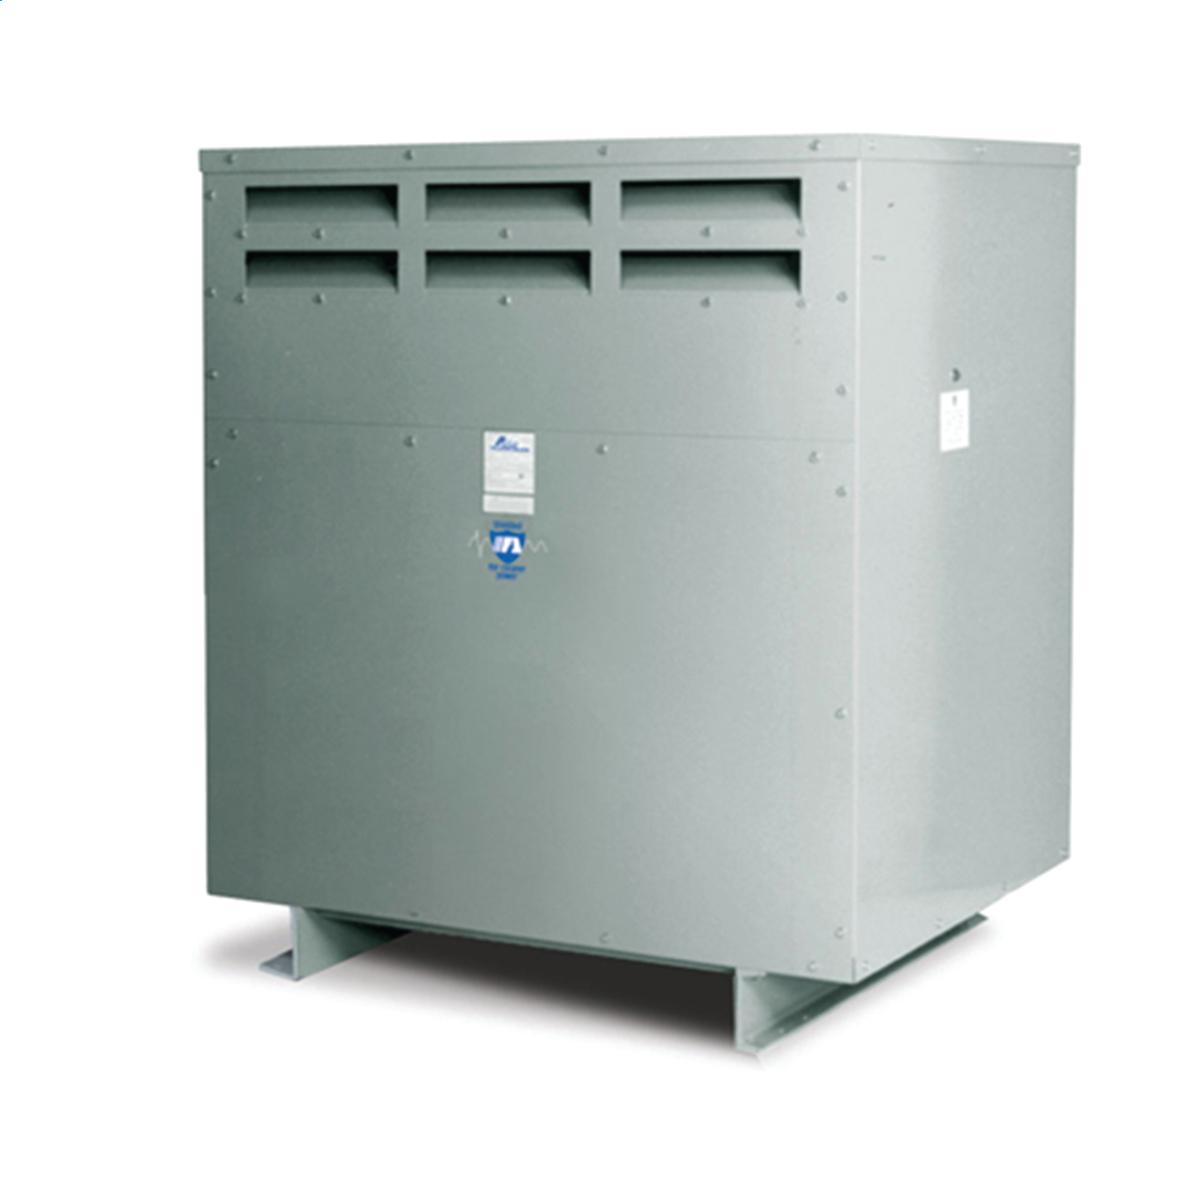 Hubbell WI015M11 Medium Voltage Transformer - Three Phase, 2400Δ - 240ΔV, 1500kVA  ; Lower operating cost over Liquid-filled ; No additional fireproofing or venting ; Long life expectancy ; Smaller, lighter easy to maintain